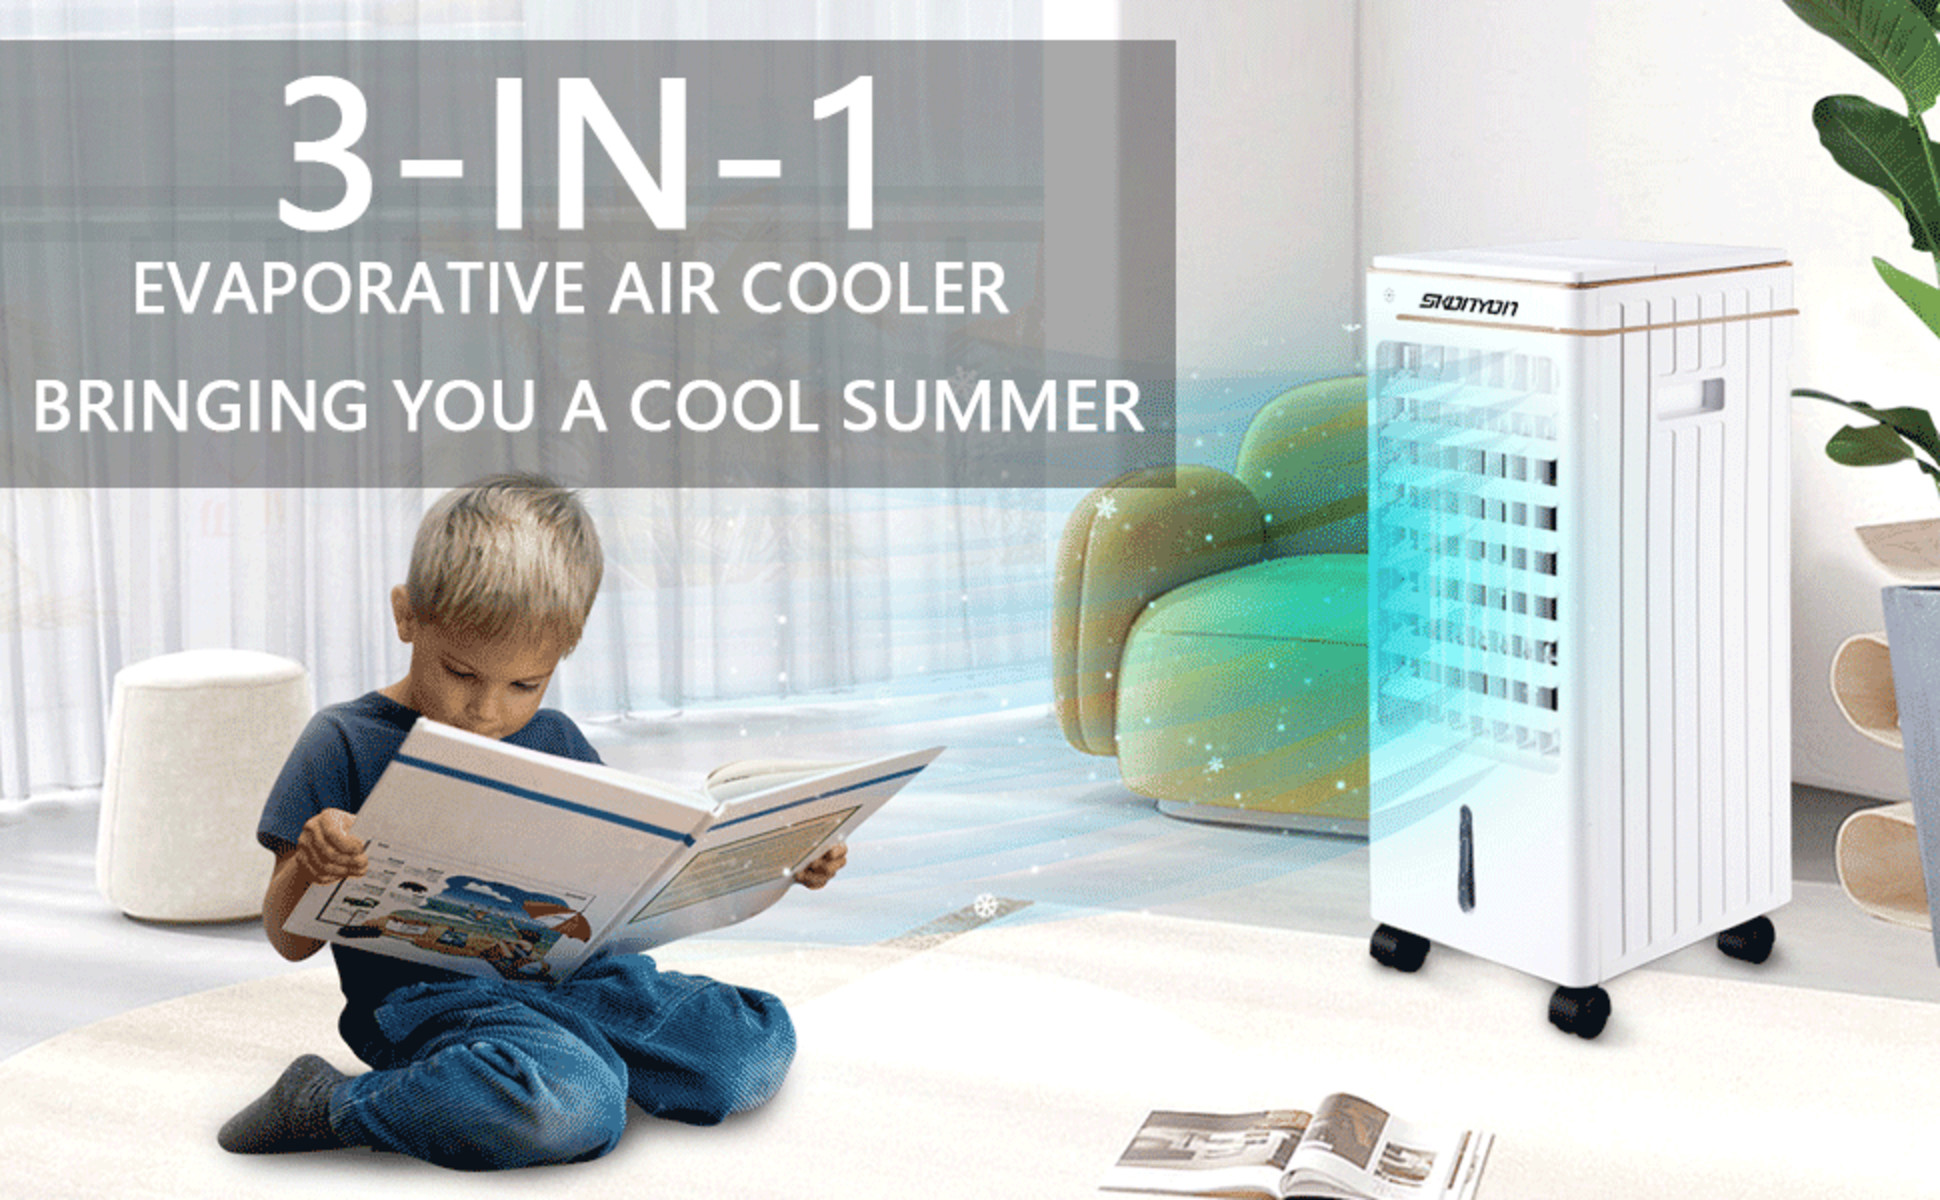 Fan　Air　Portable　Cooling　Evaporative　3-IN-1　YouYeap　Cooler